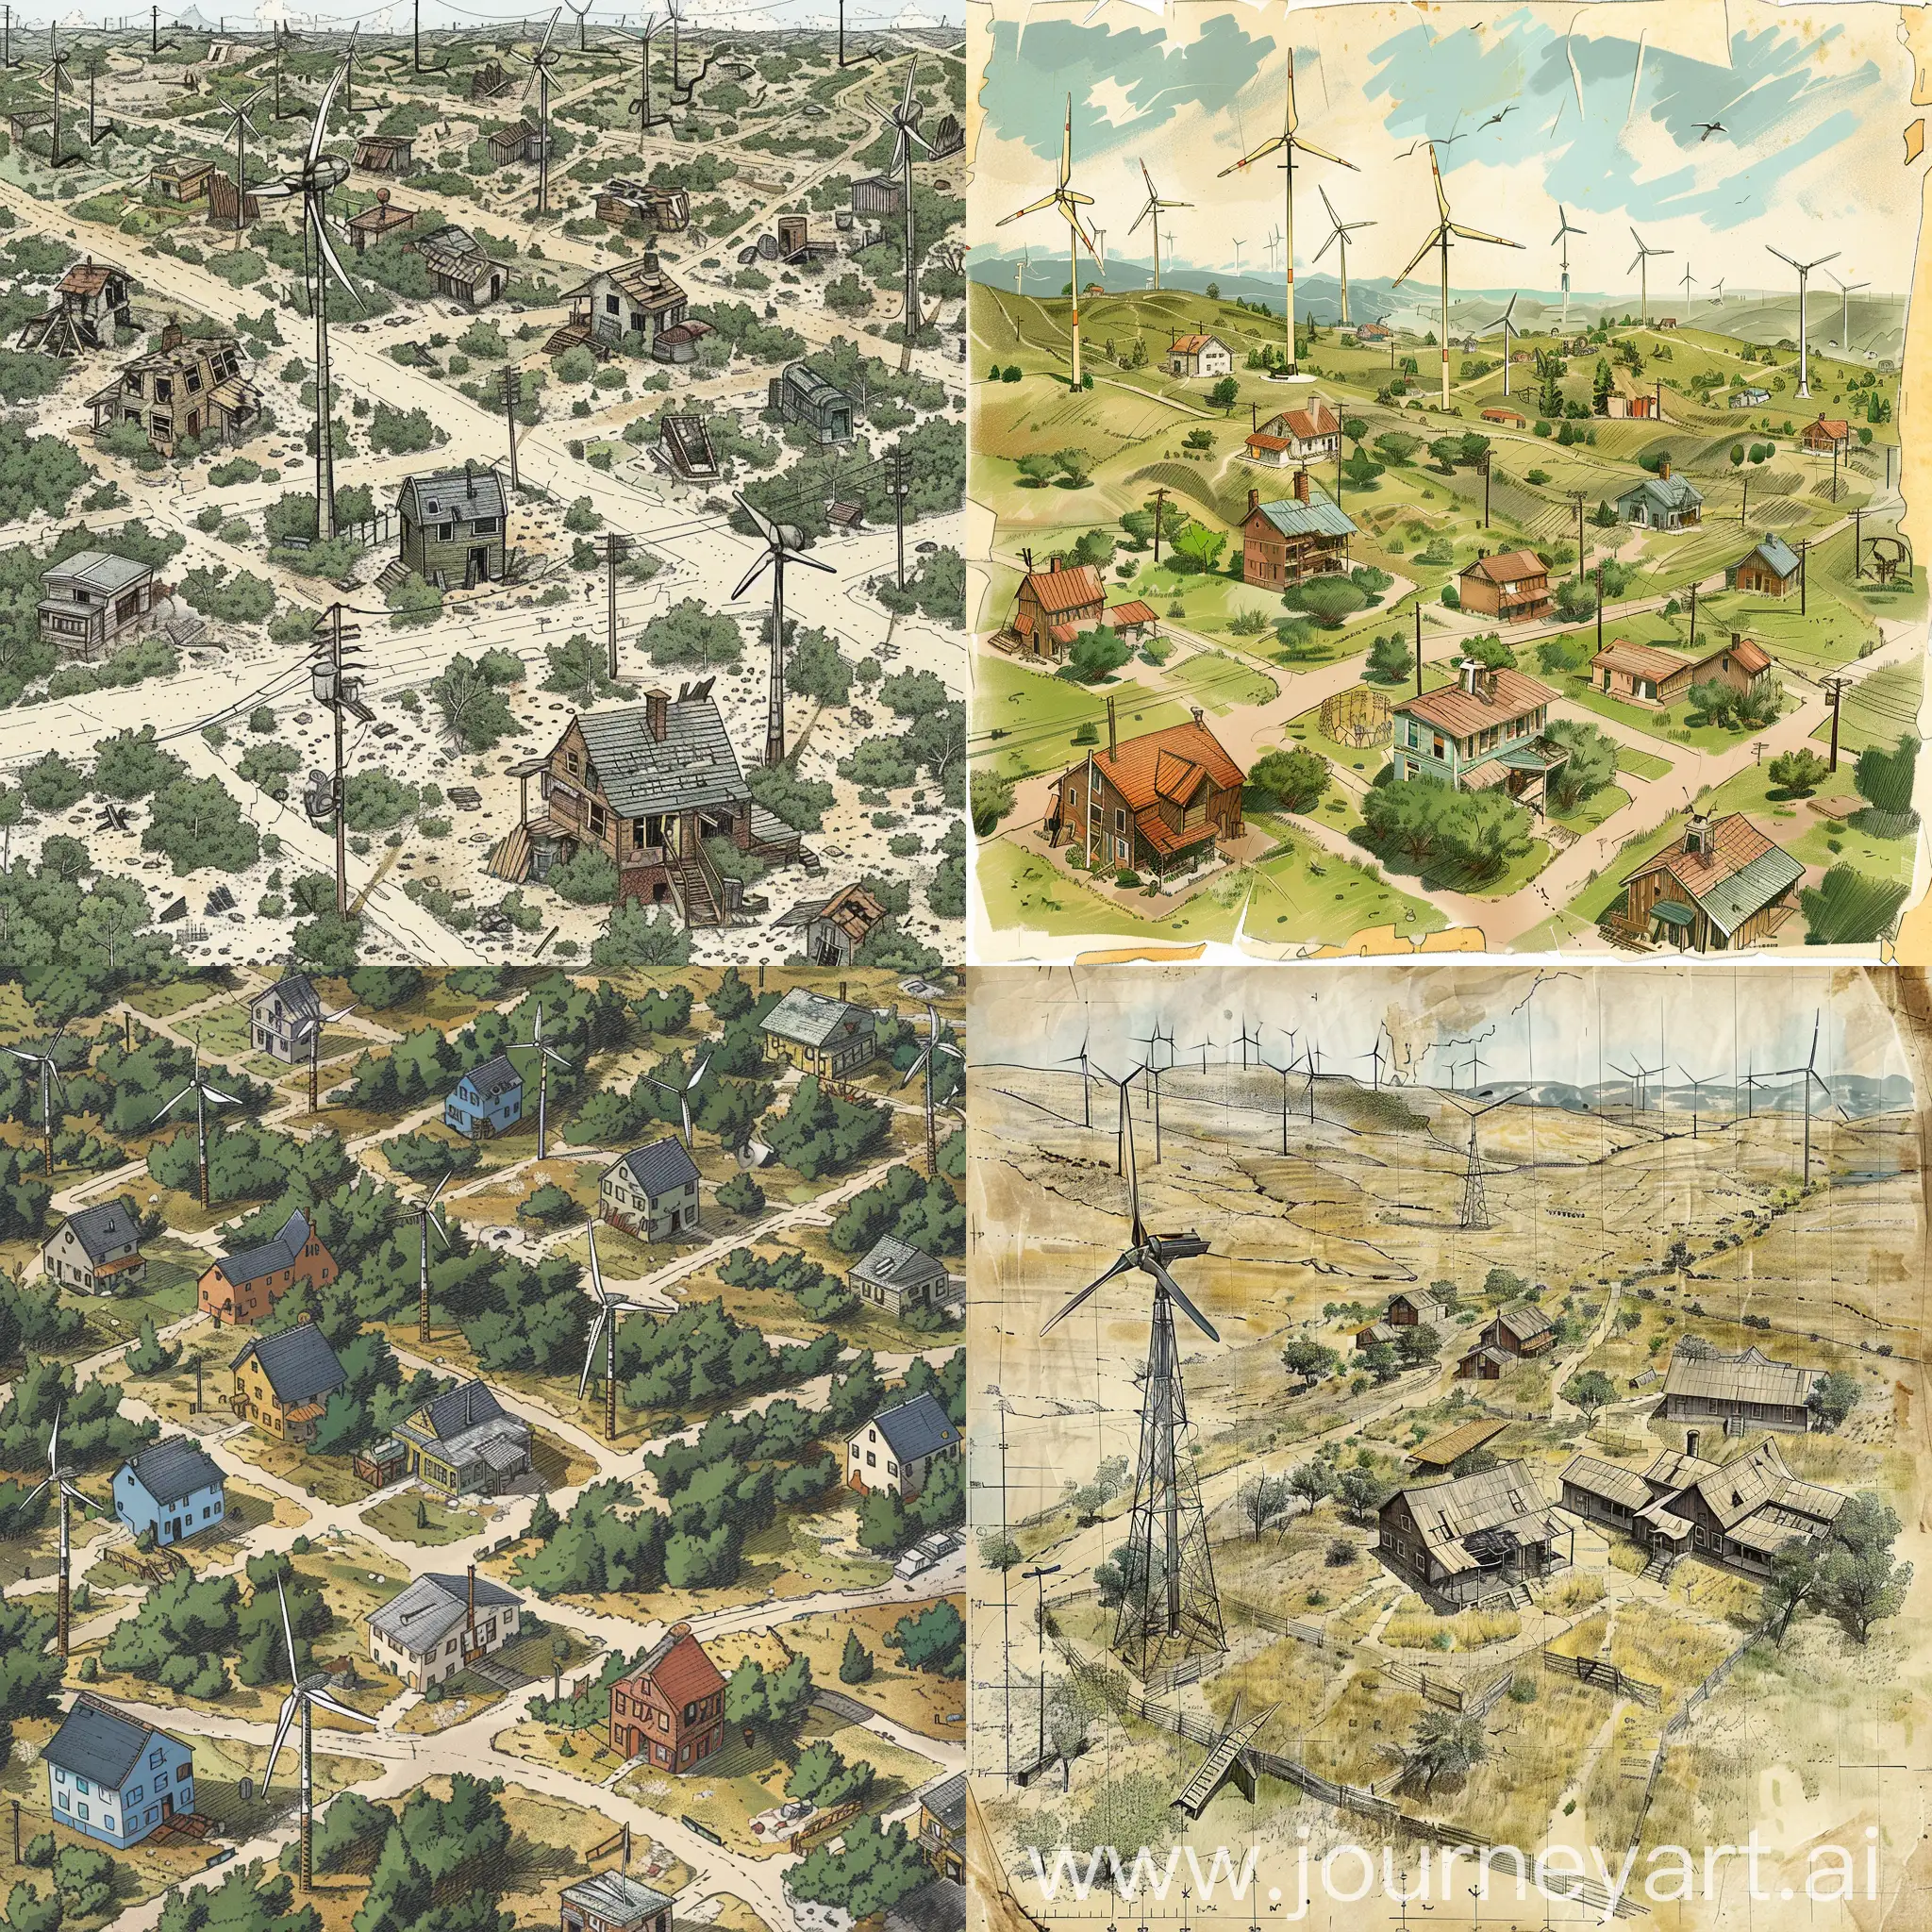 Futuristic-Texas-Birds-Eye-View-of-Windmills-and-Abandoned-Town-in-Schematic-Color-Map